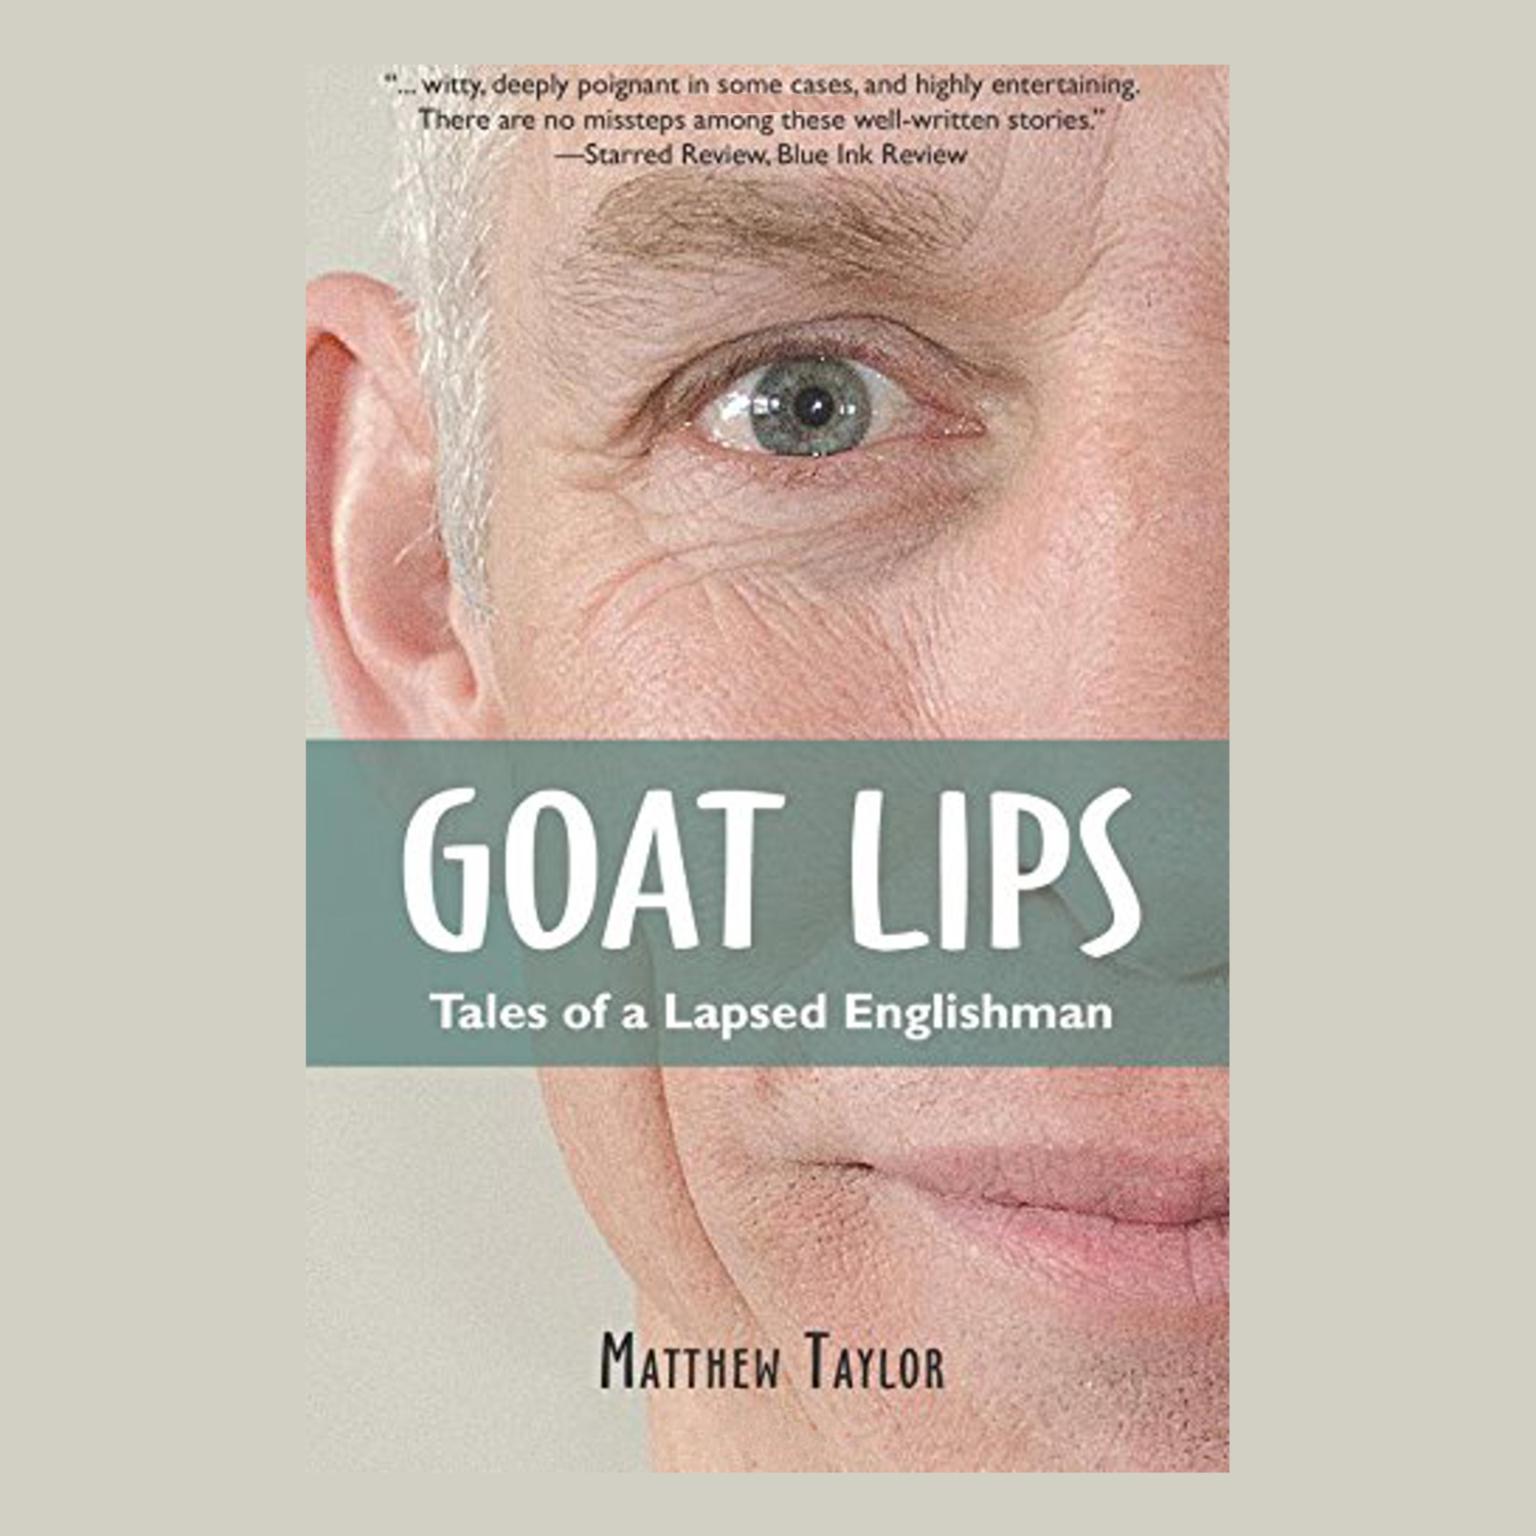 Goat Lips: Tales of a Lapsed Englishman Audiobook, by Matthew Taylor